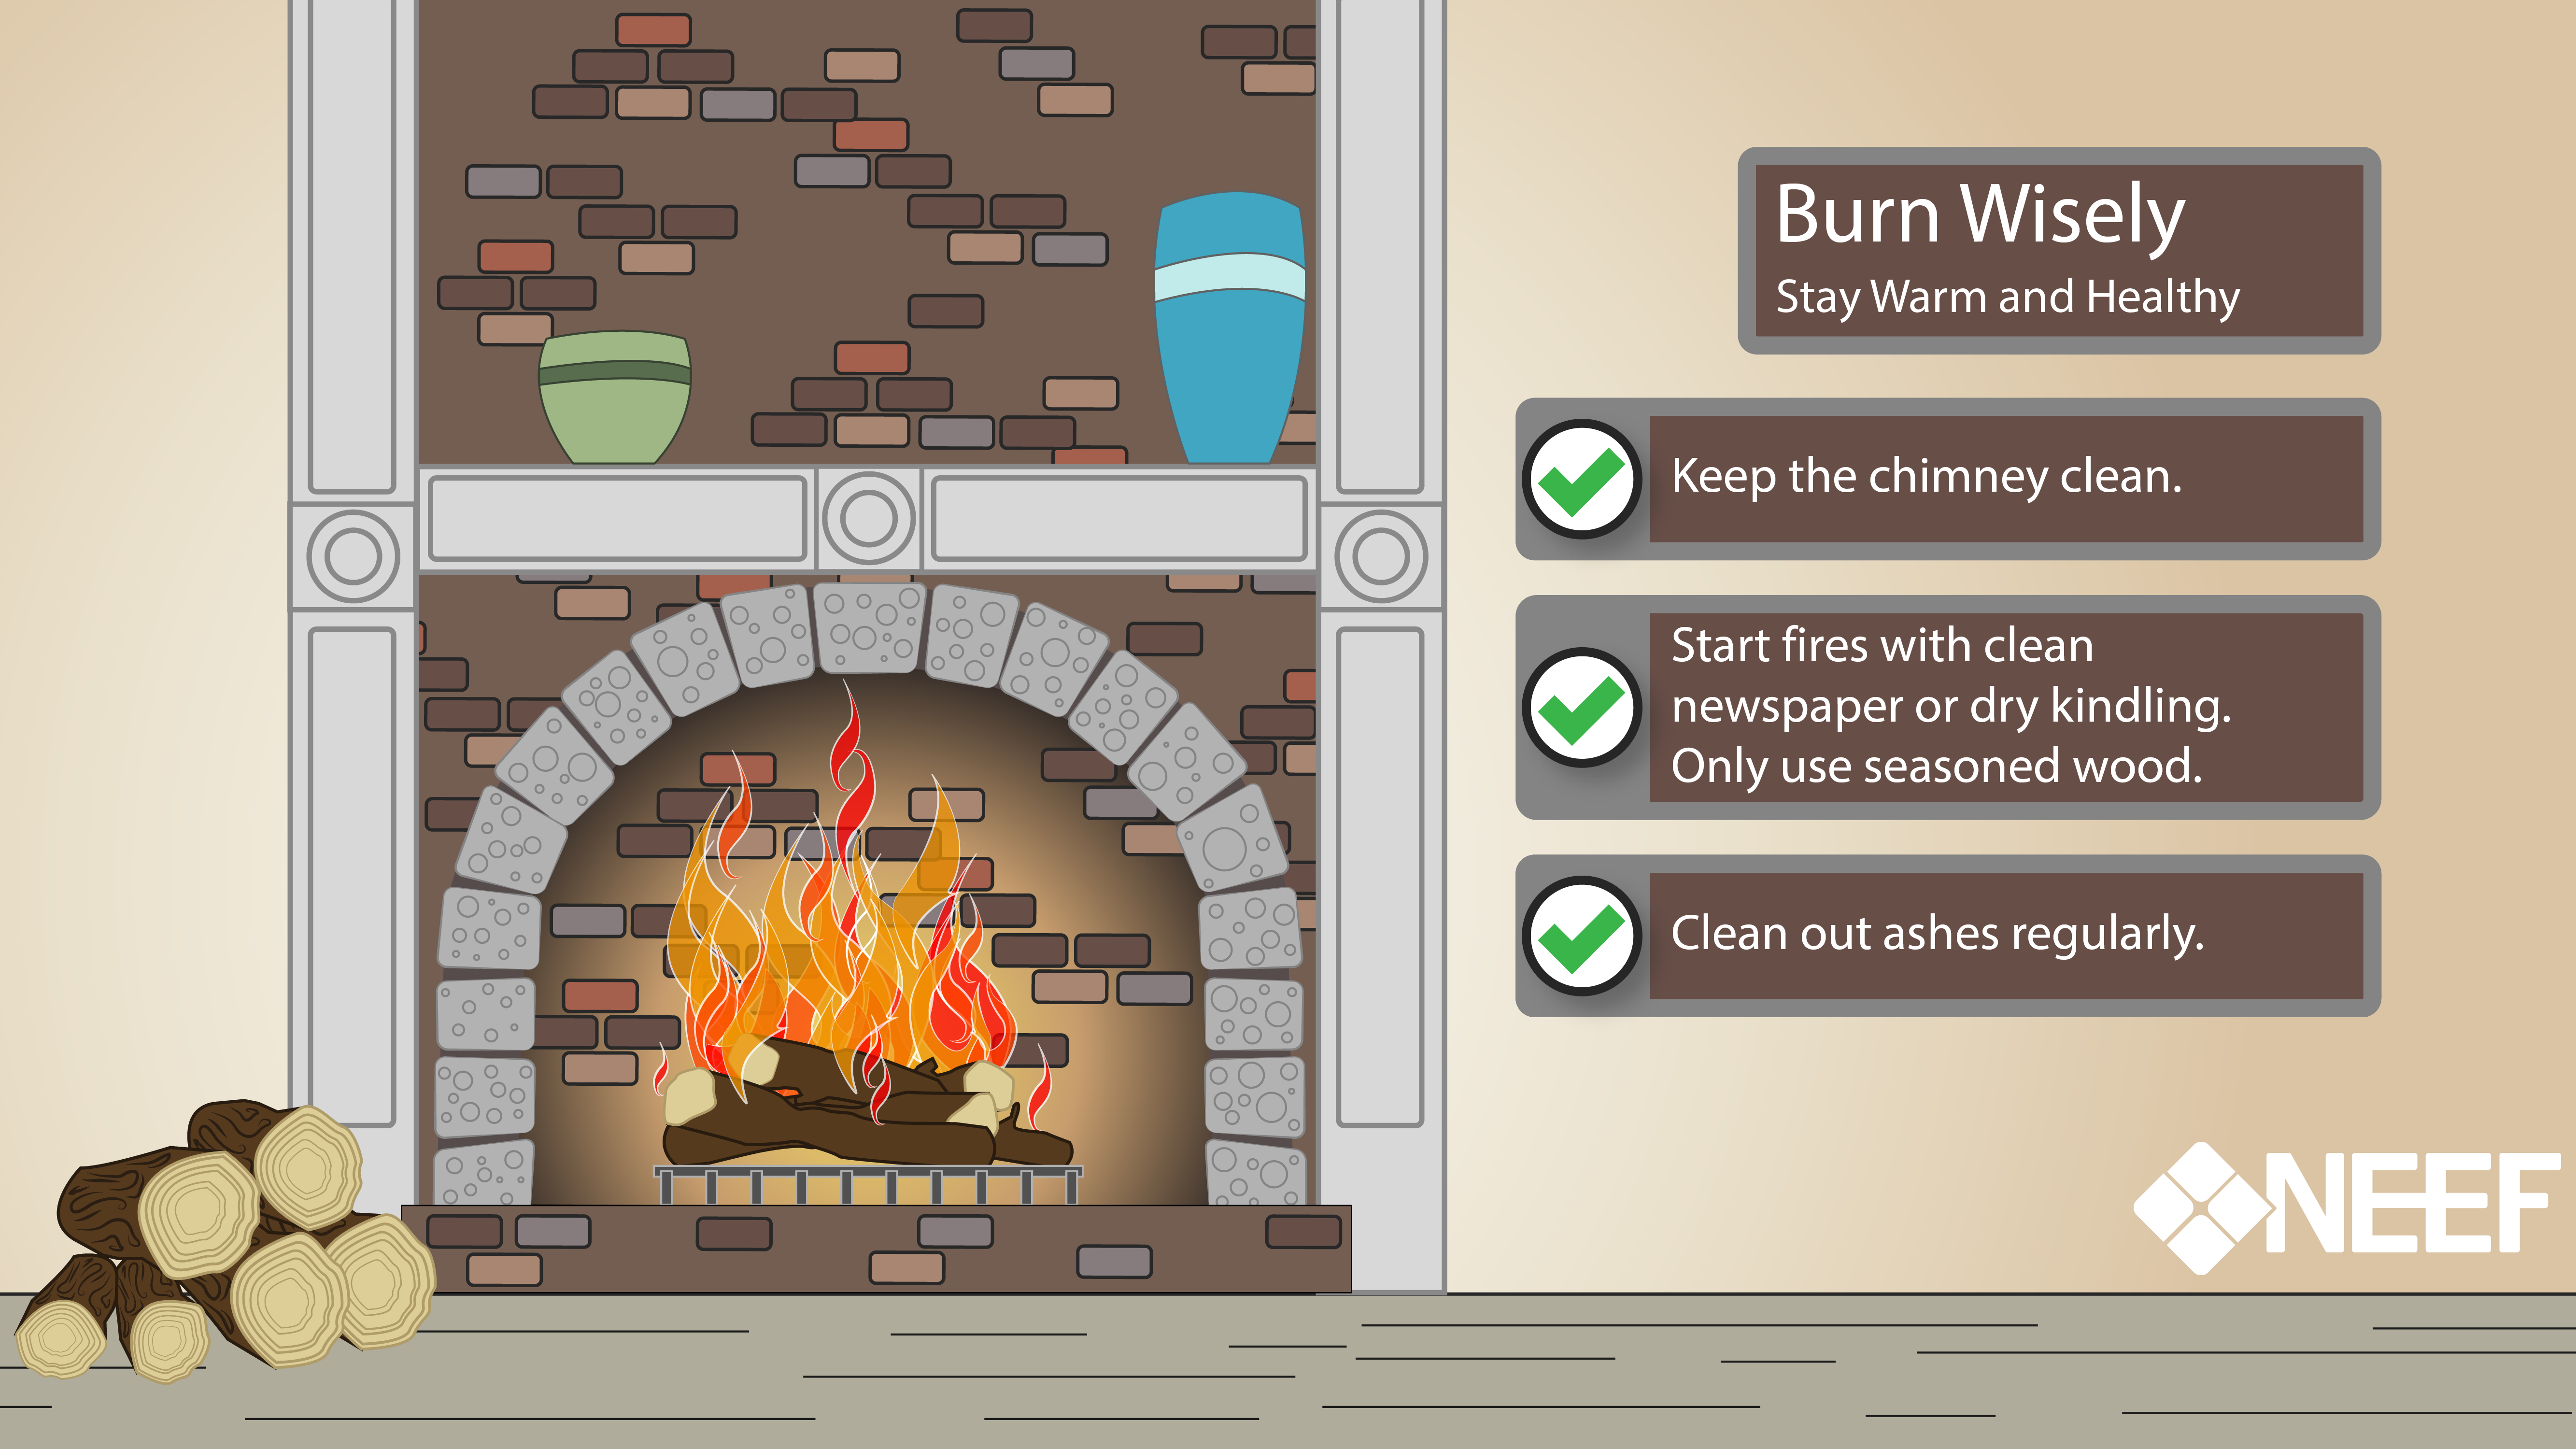 Burn wisely infographic